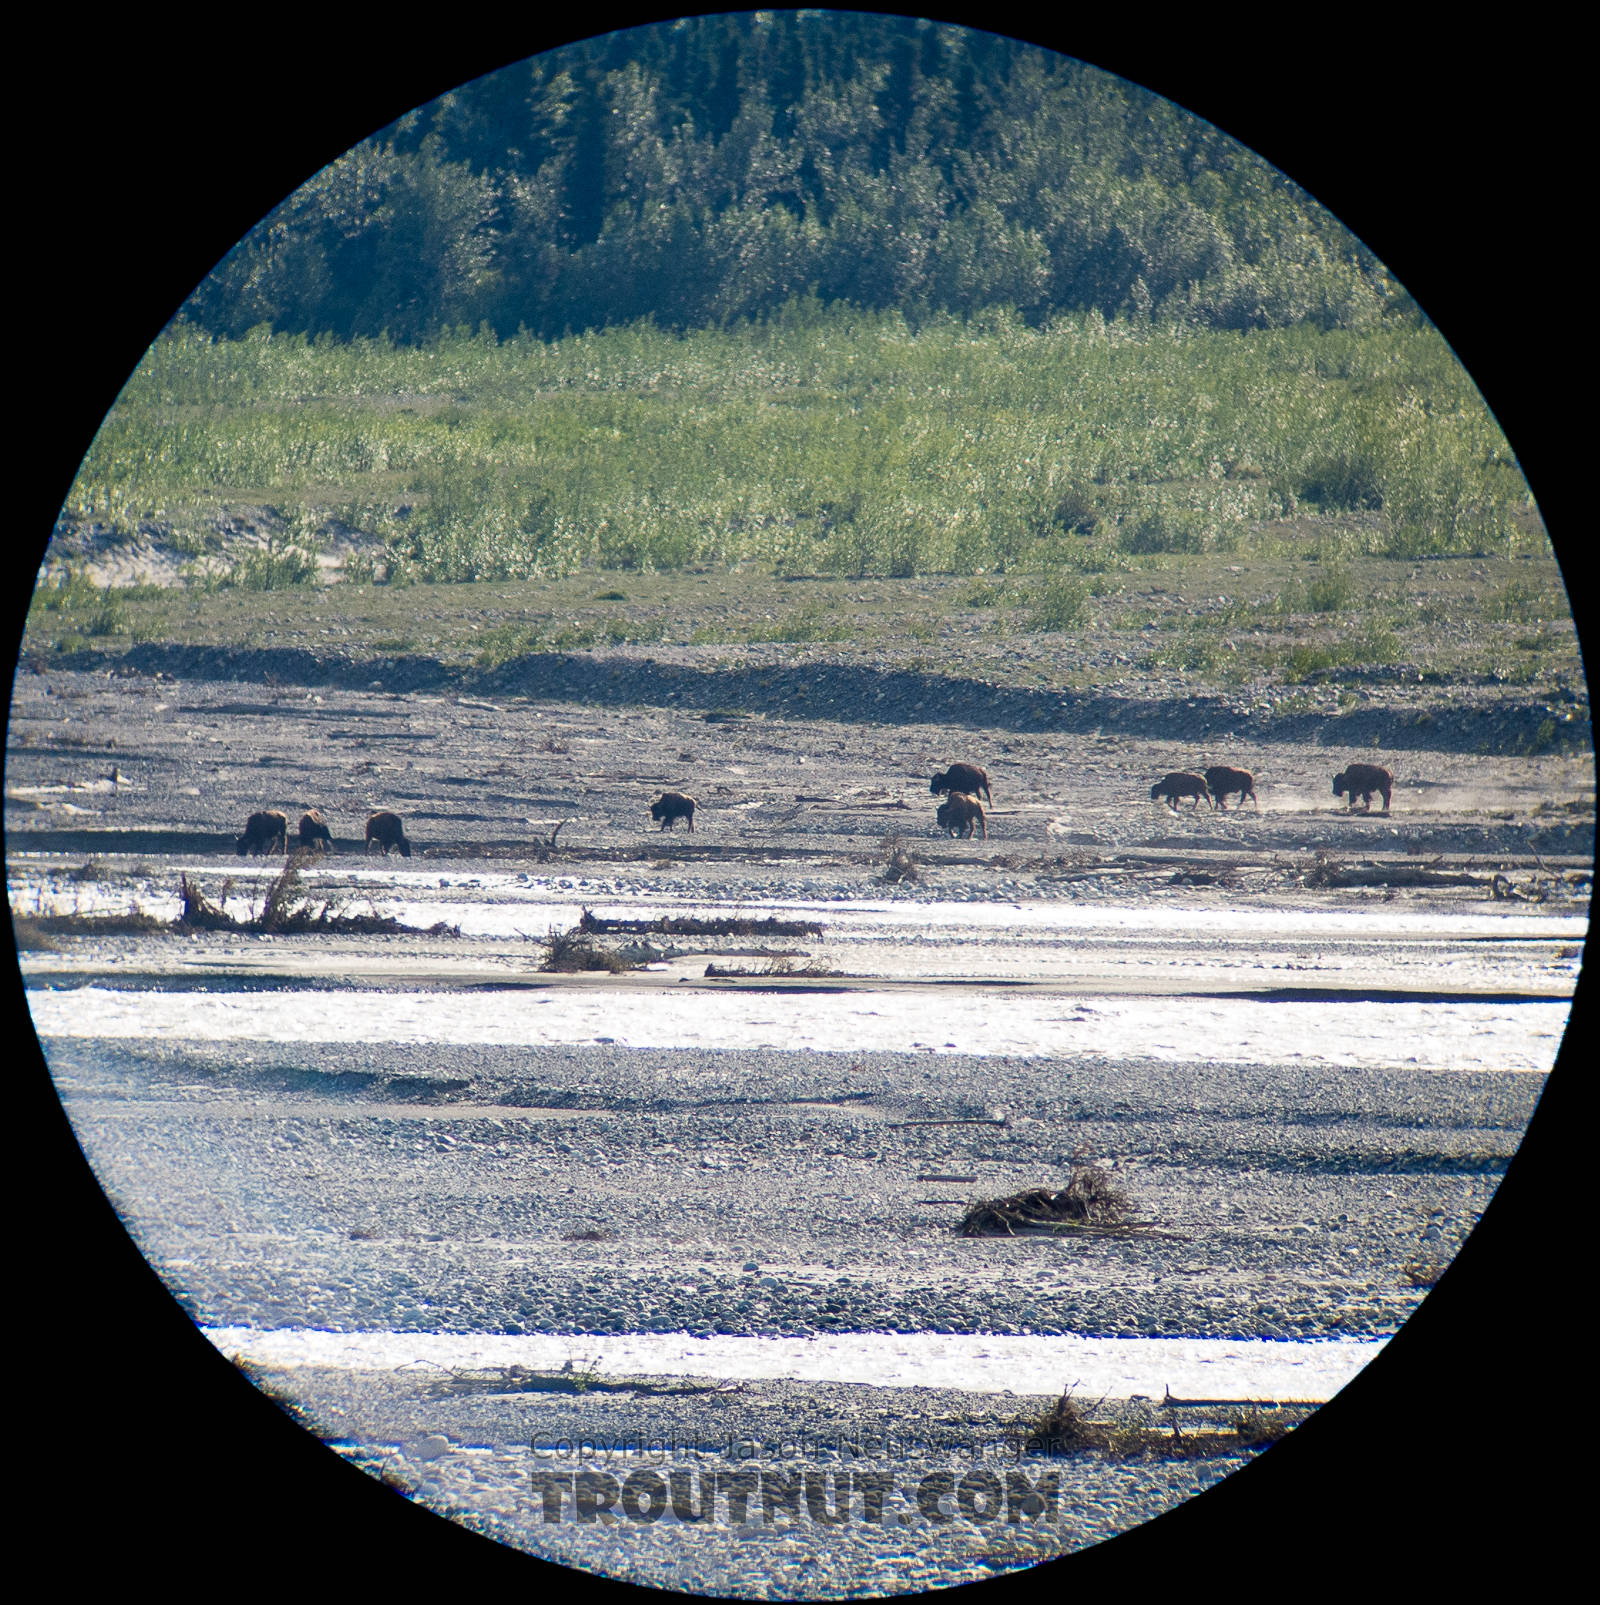 Every time I drive past the Delta River overlooks on the Richardson Highway southwest of Fairbanks, I look for the wild bison that supposedly calve in that area. I've never seen them until this trip, when a few dozen were milling around out in the open valley next to the big glacial river. I snapped this picture through my spotting scope. From the Delta River in Alaska.